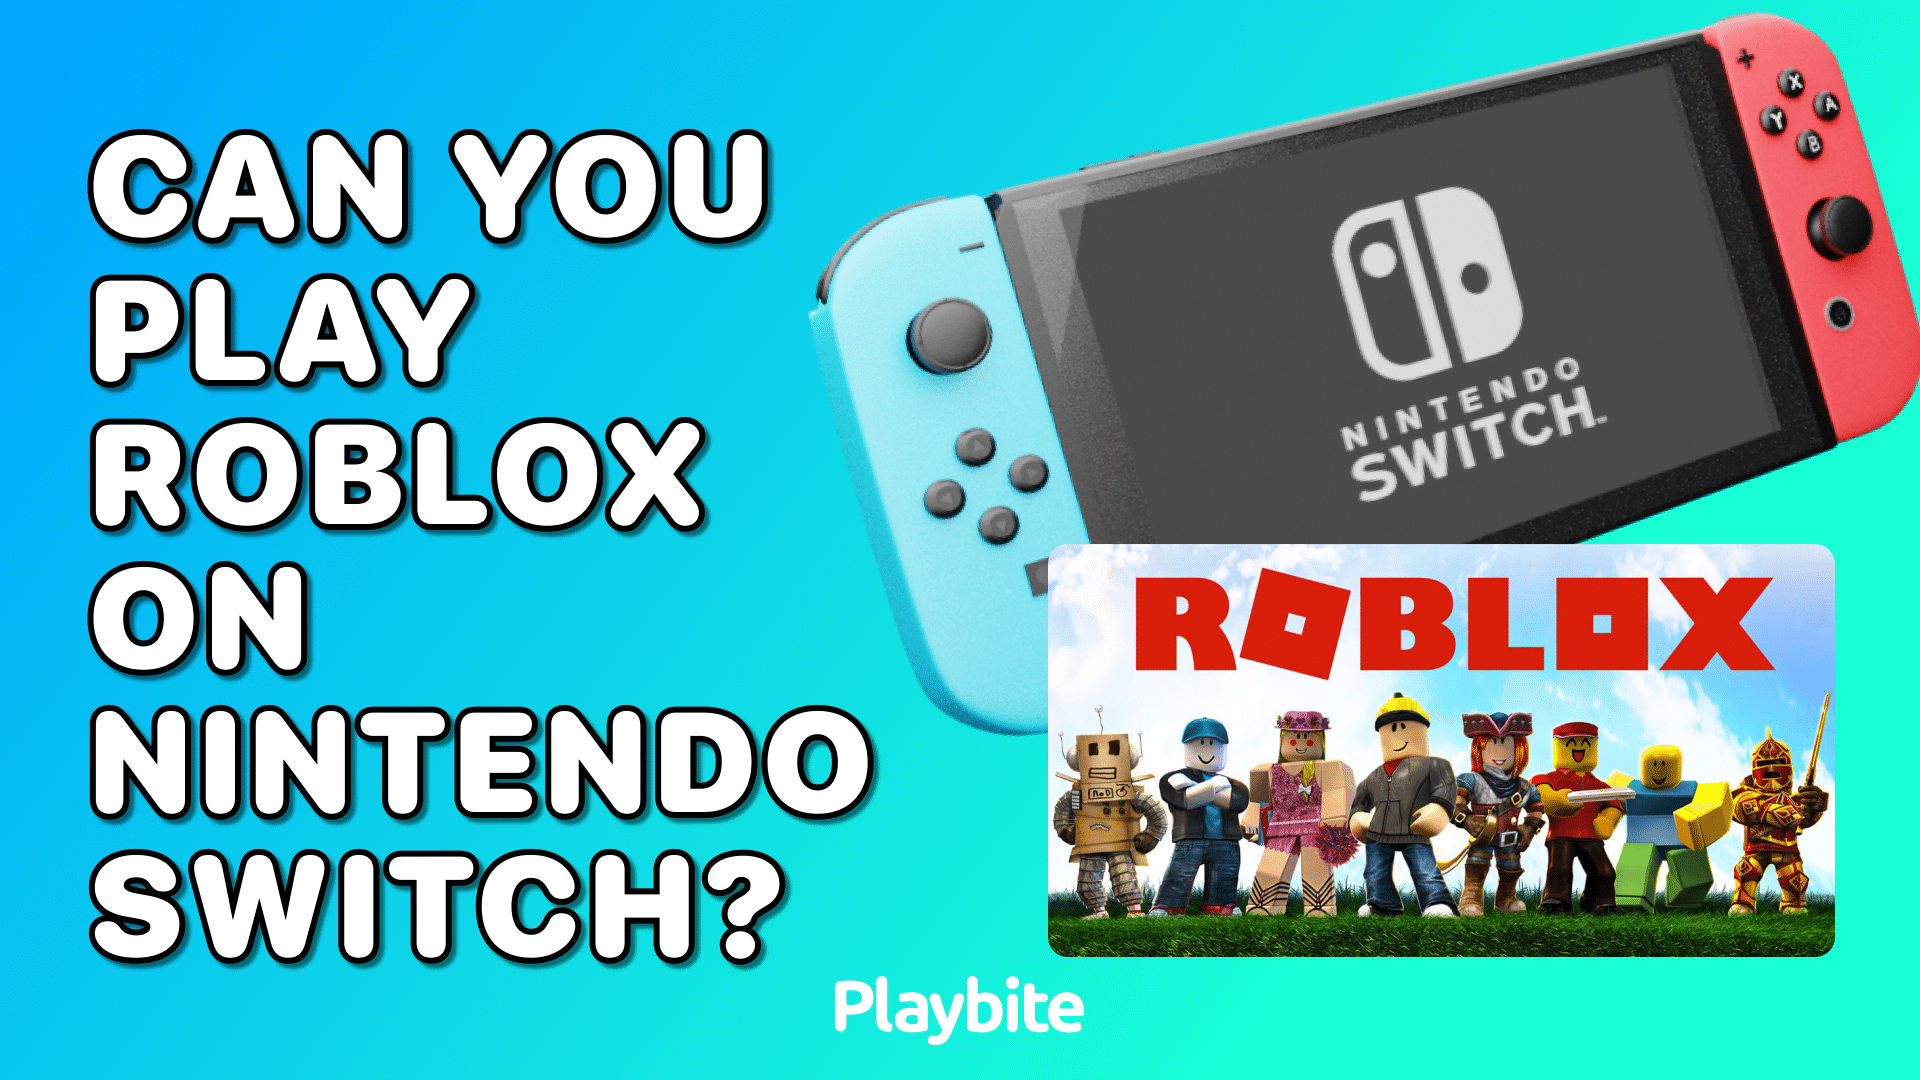 Is Roblox Coming to Nintendo Switch?